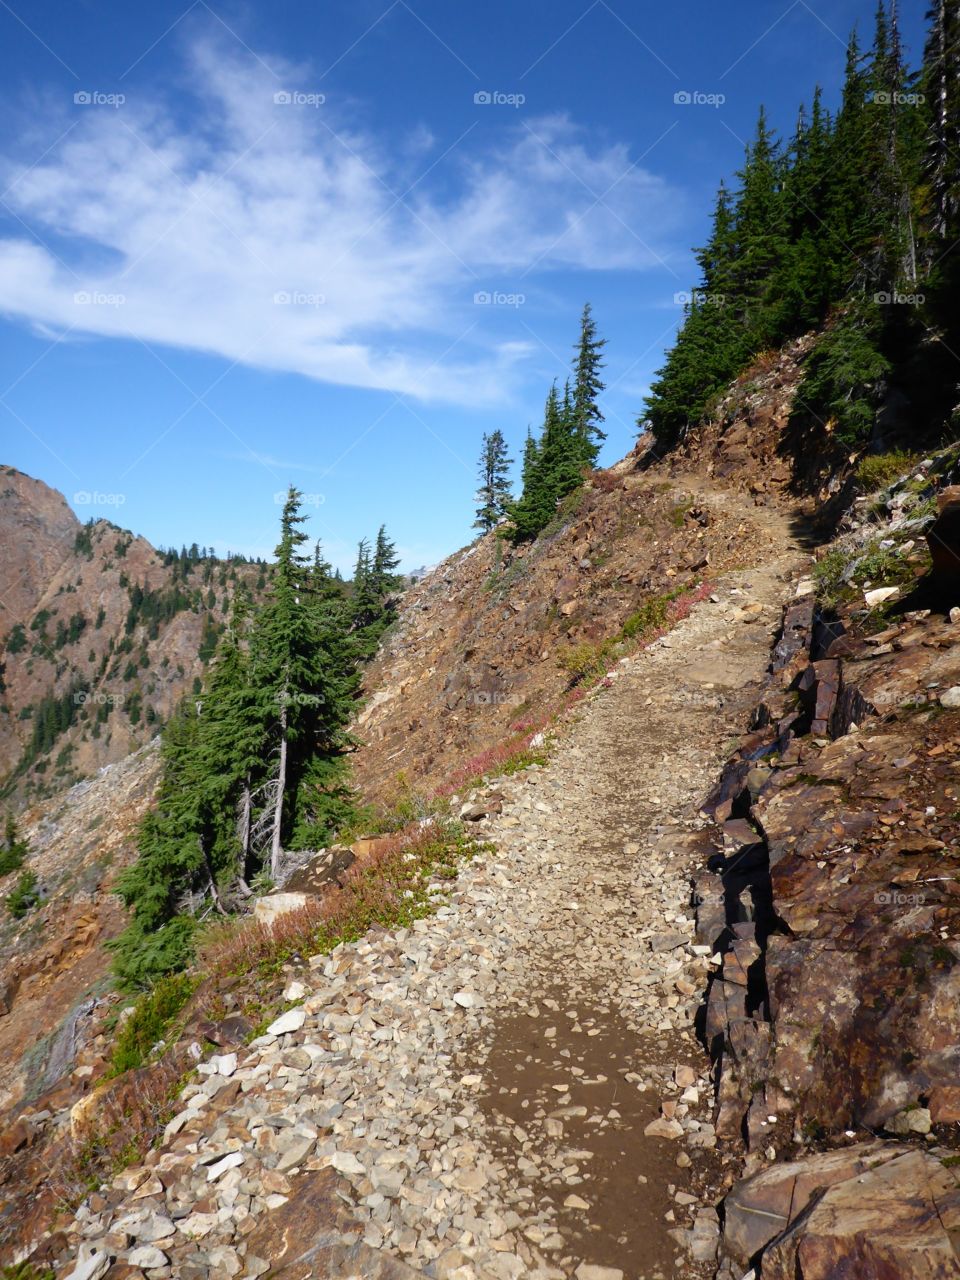 Pacific Crest Trail. Hiking the famous Pacific Crest Trail or PCT